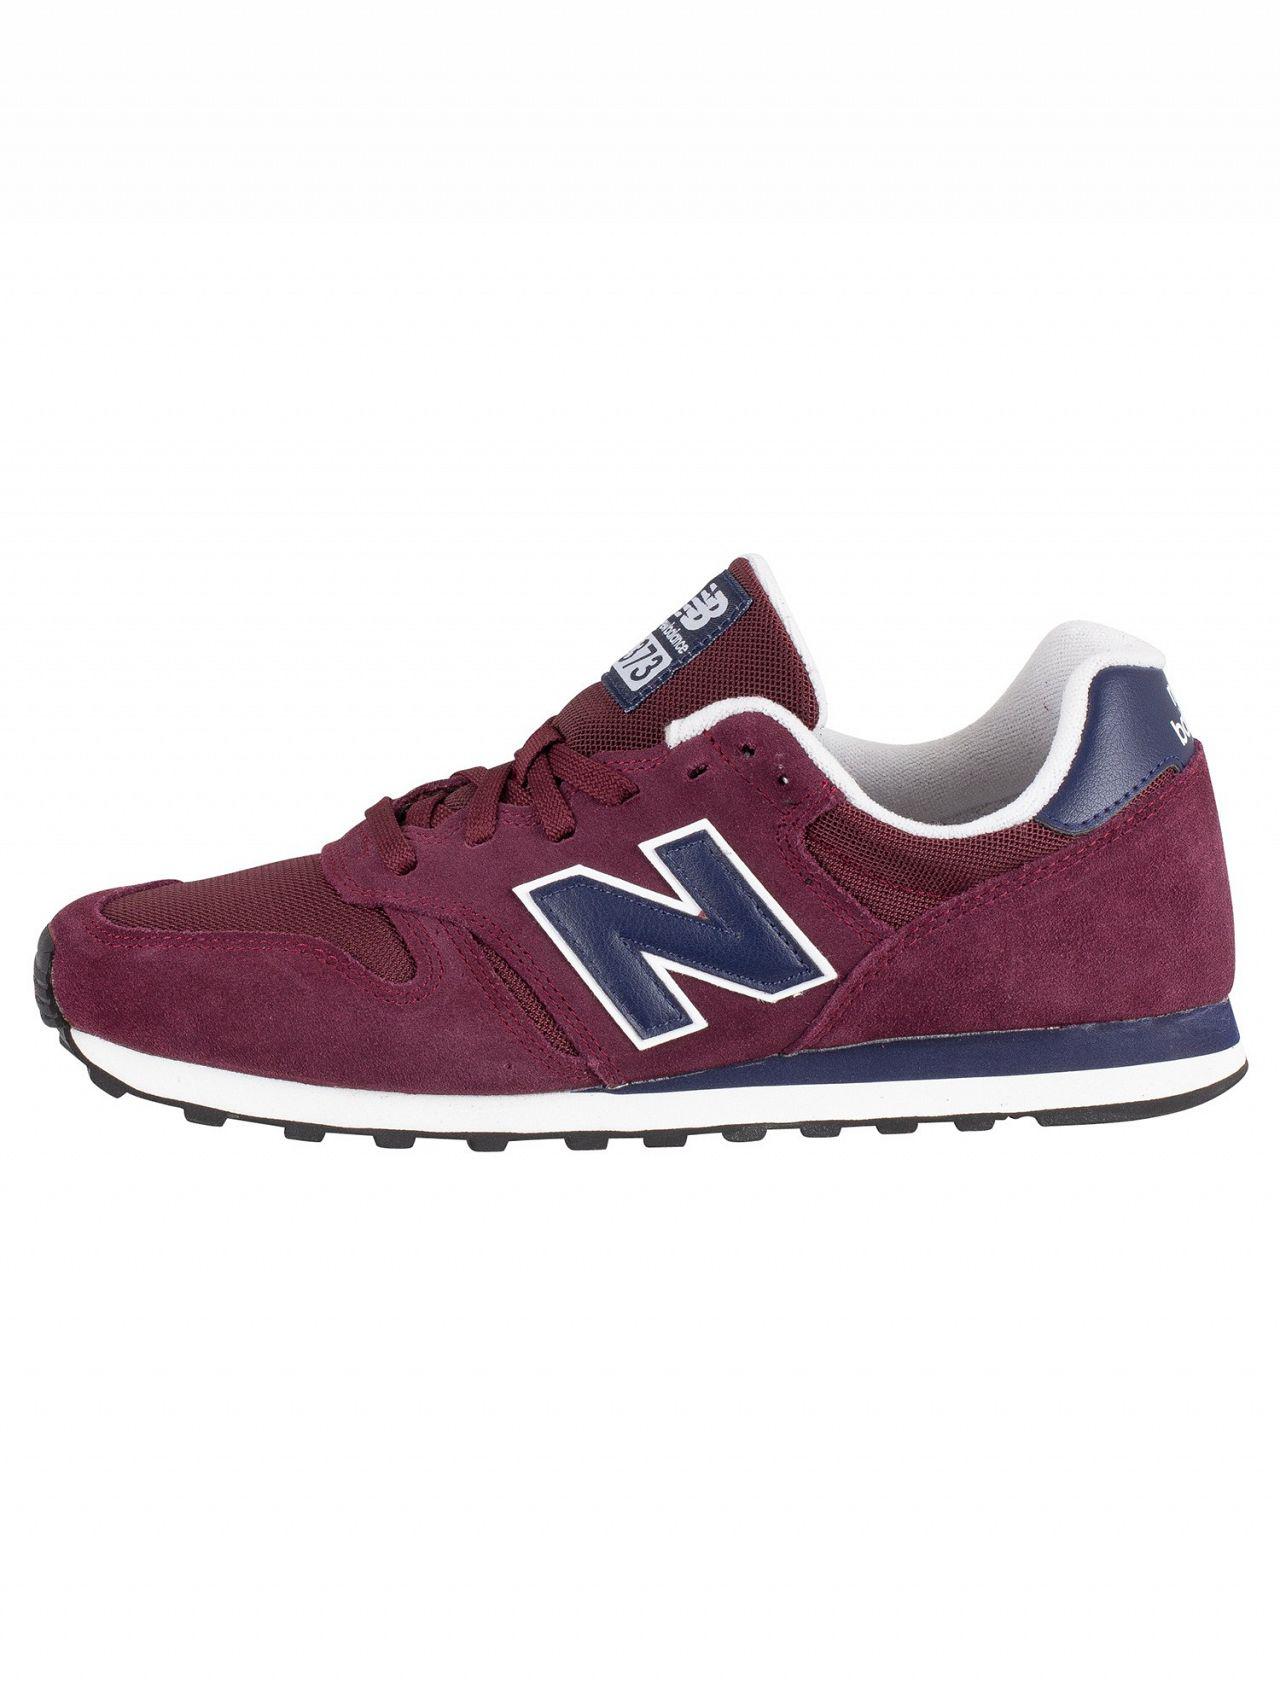 new balance 373 trainers in navy